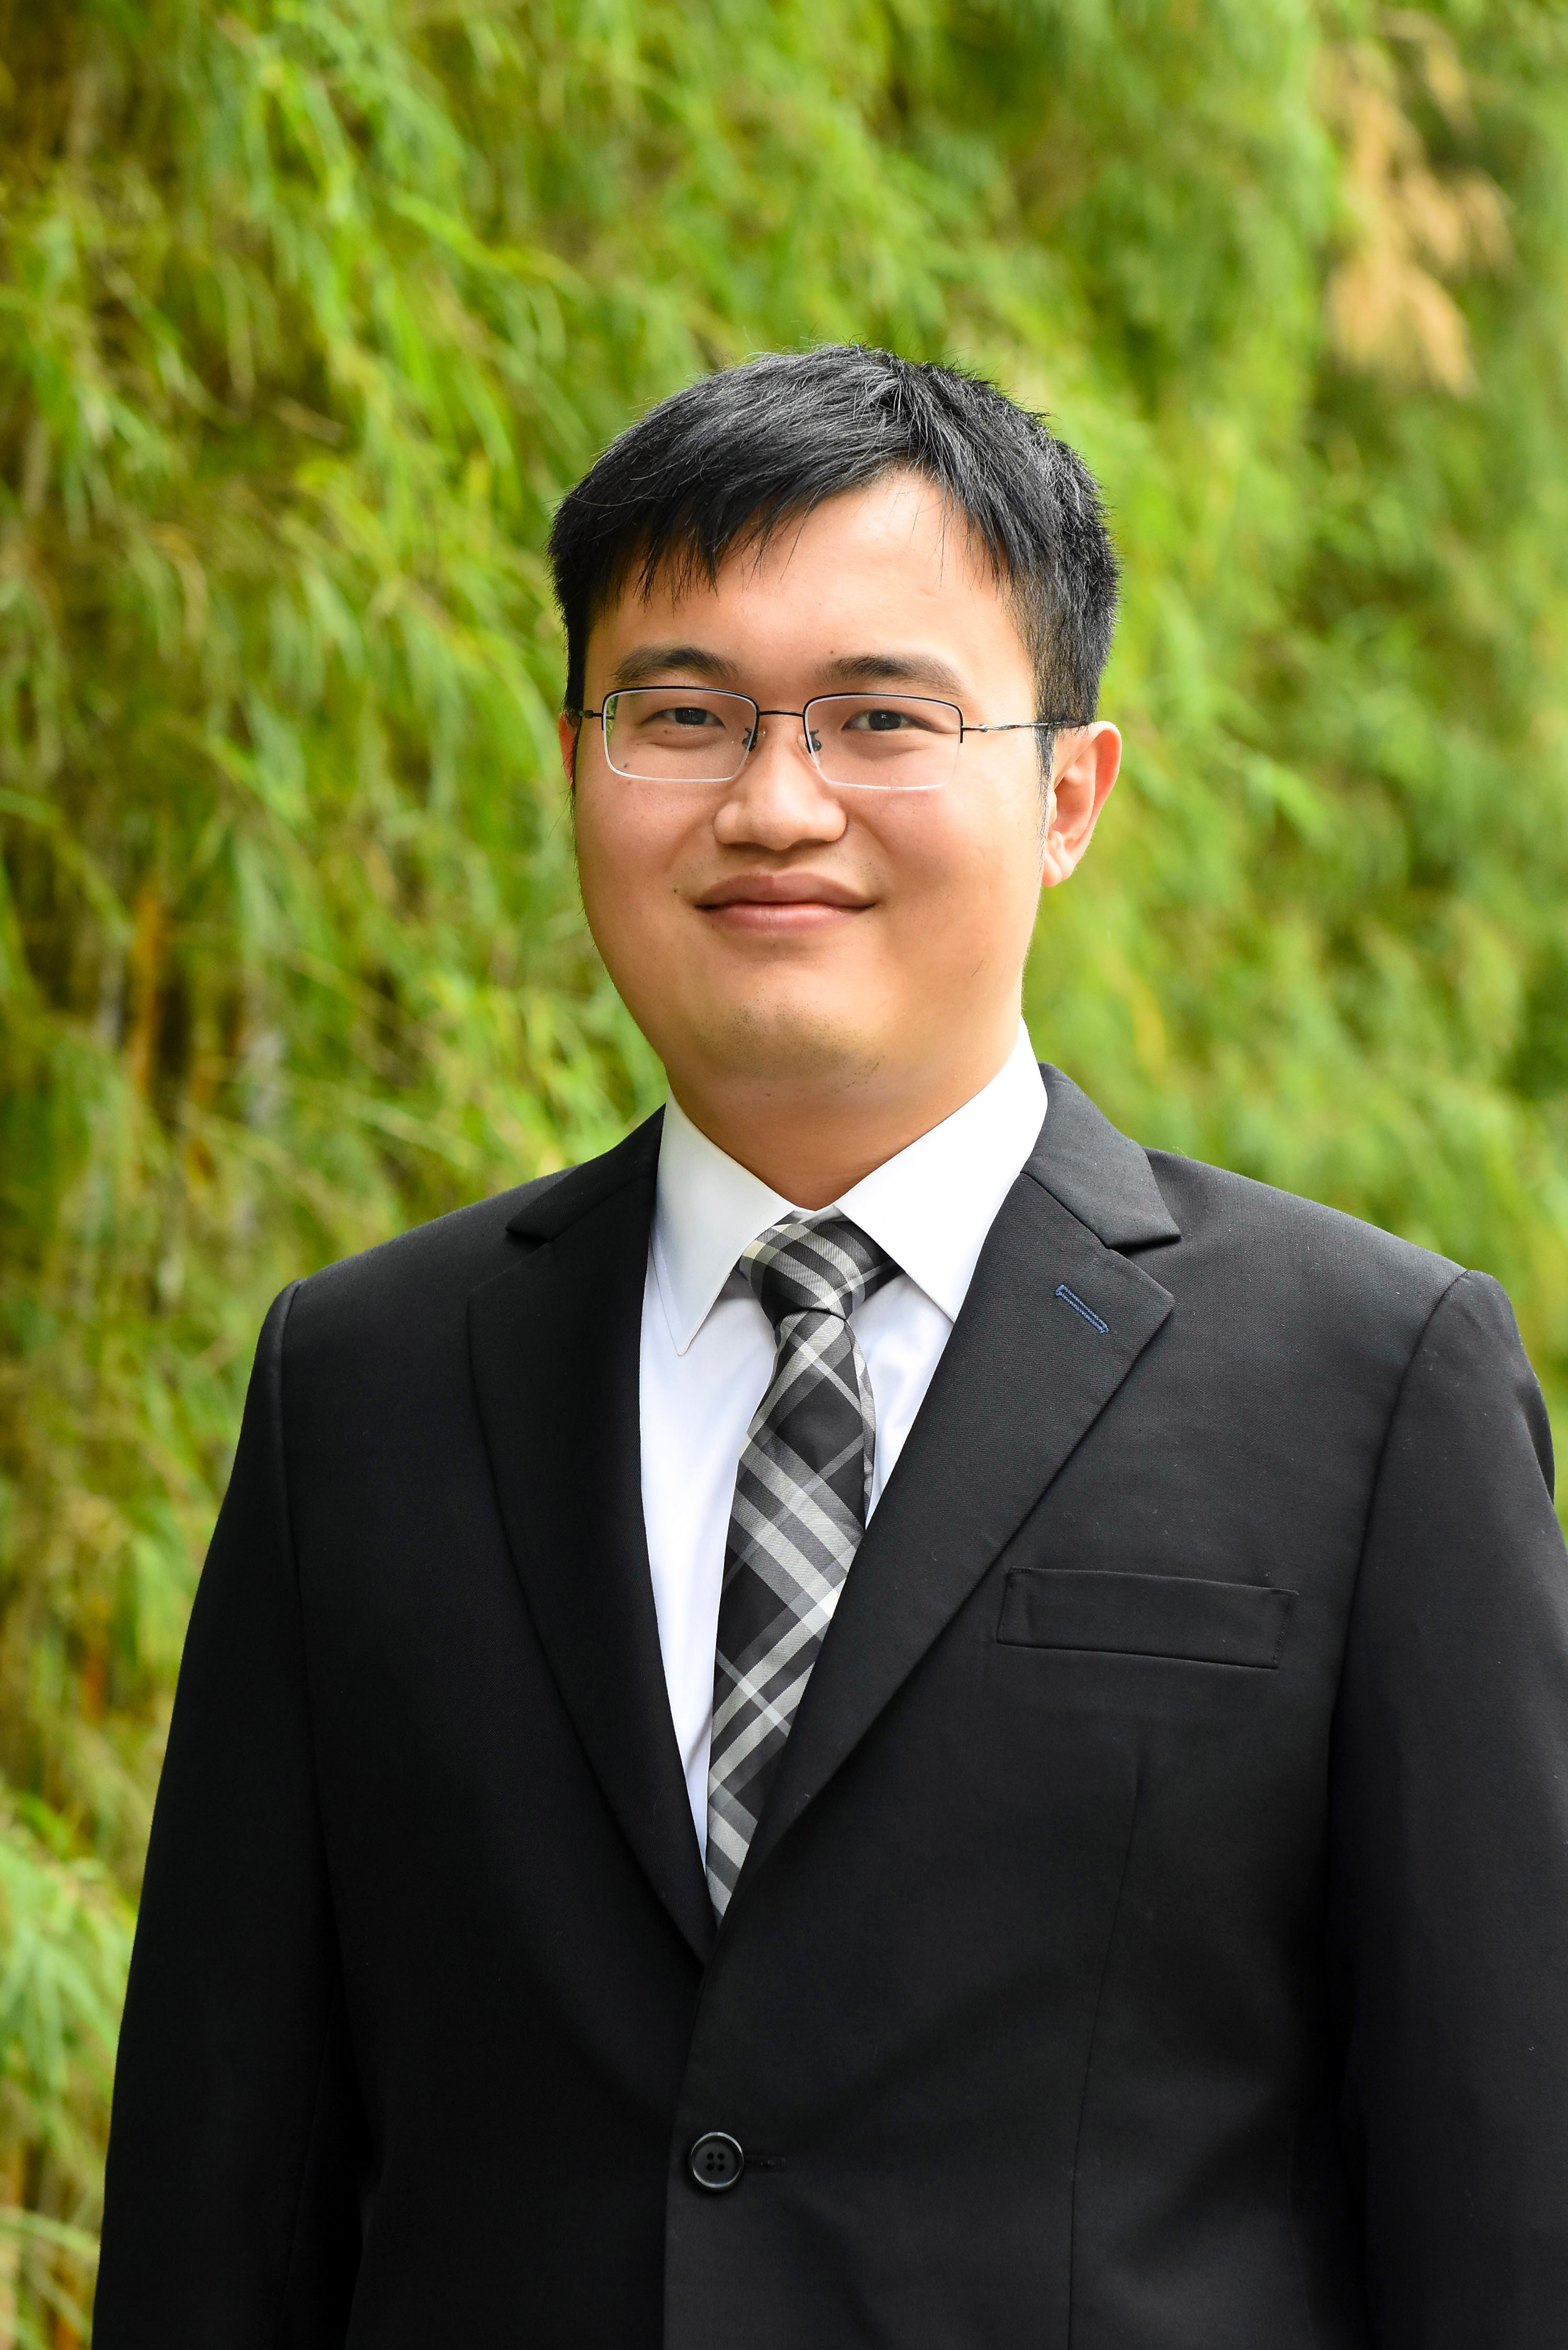 PhD Student Profiles - Lee Kuan Yew School of Public Policy